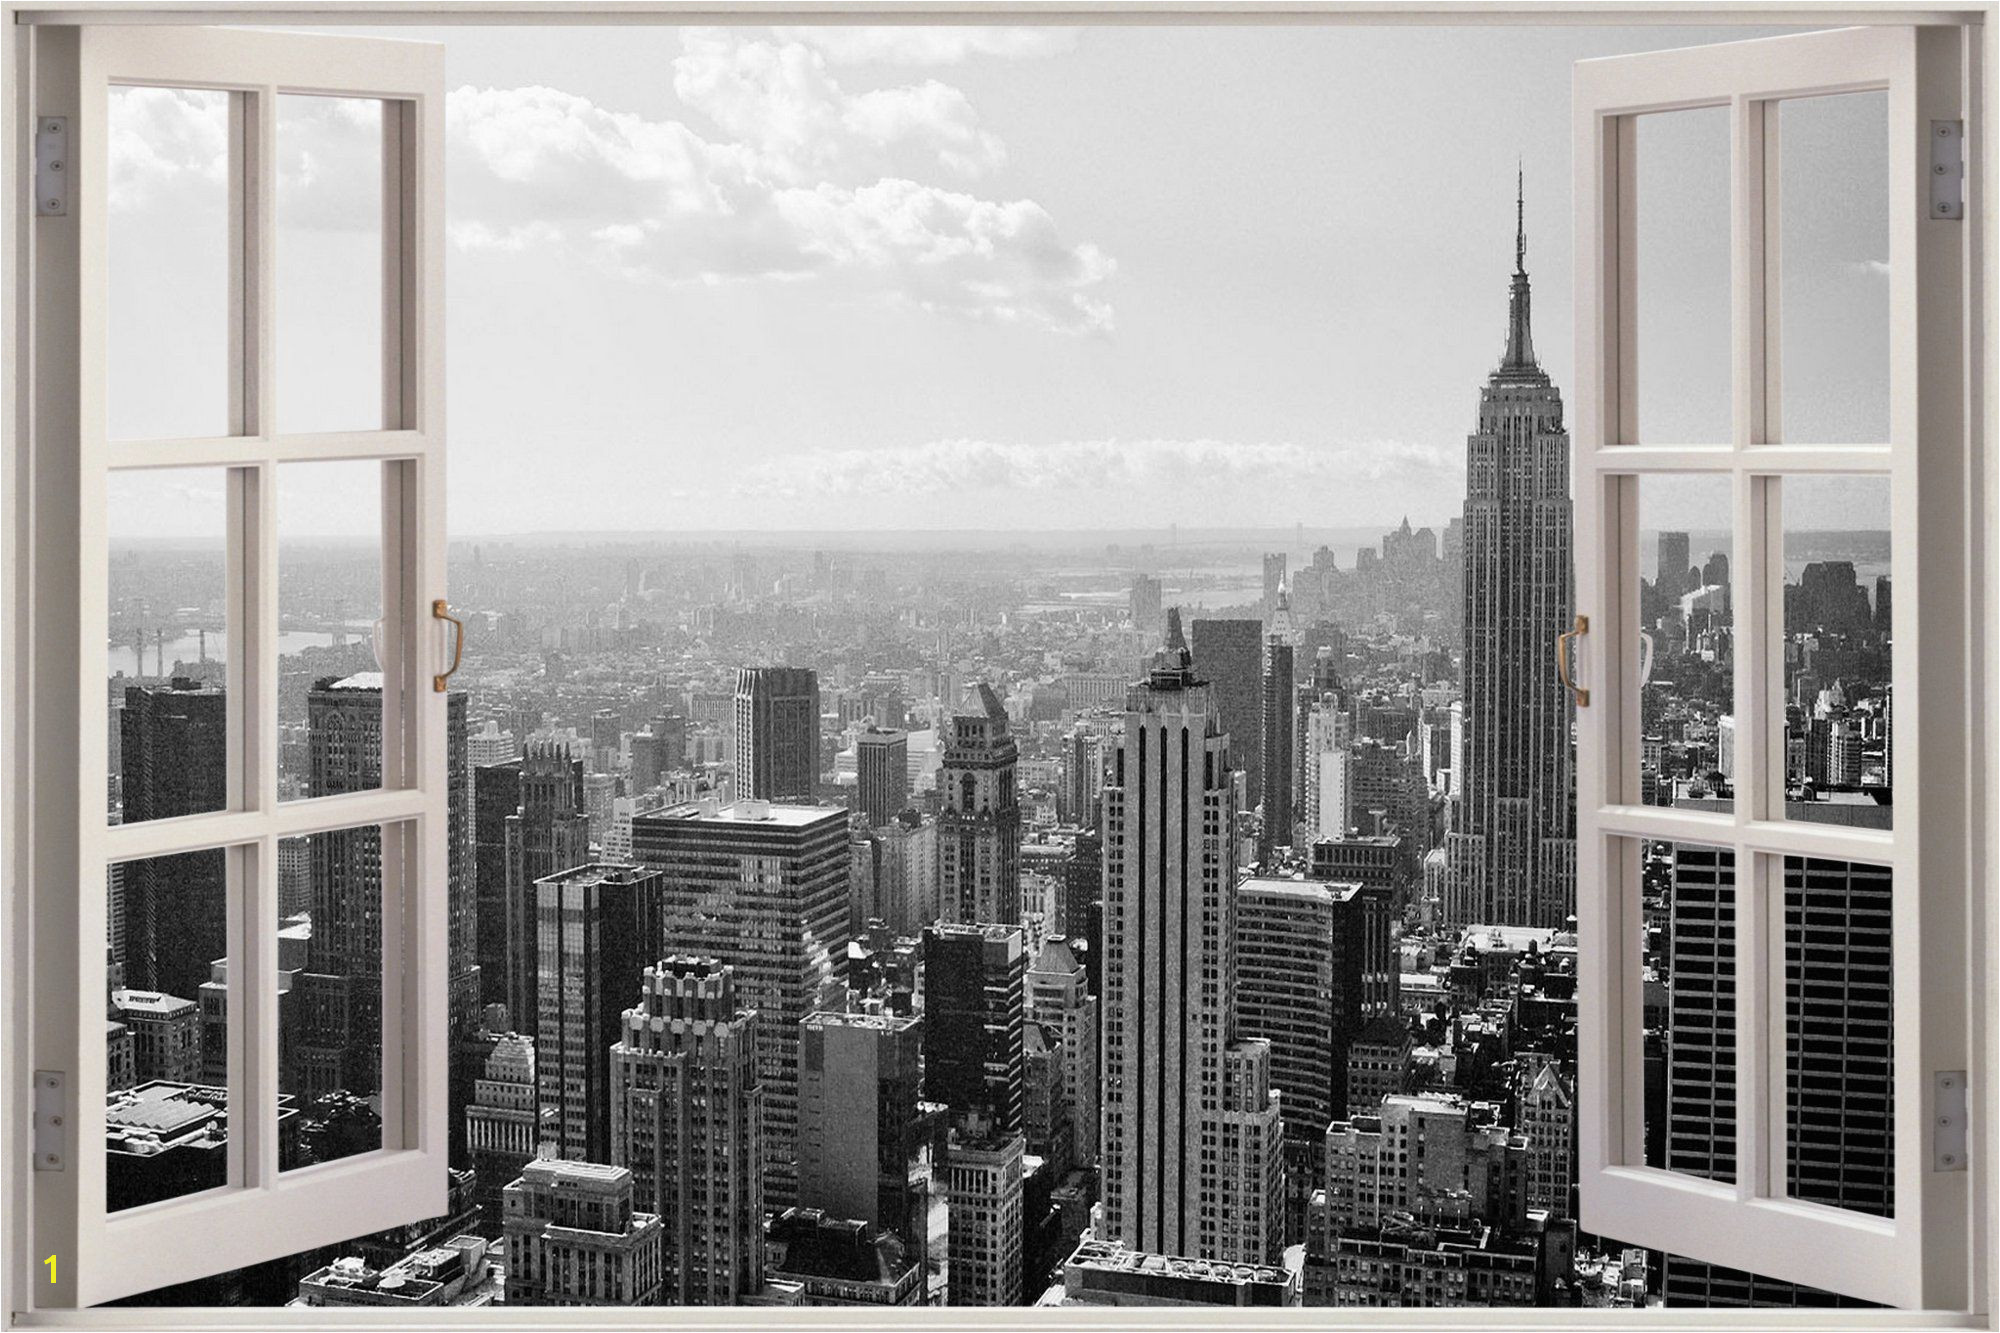 Nyc Skyline Wall Mural Huge 3d Window New York City View Wall Stickers Mural Art Decal